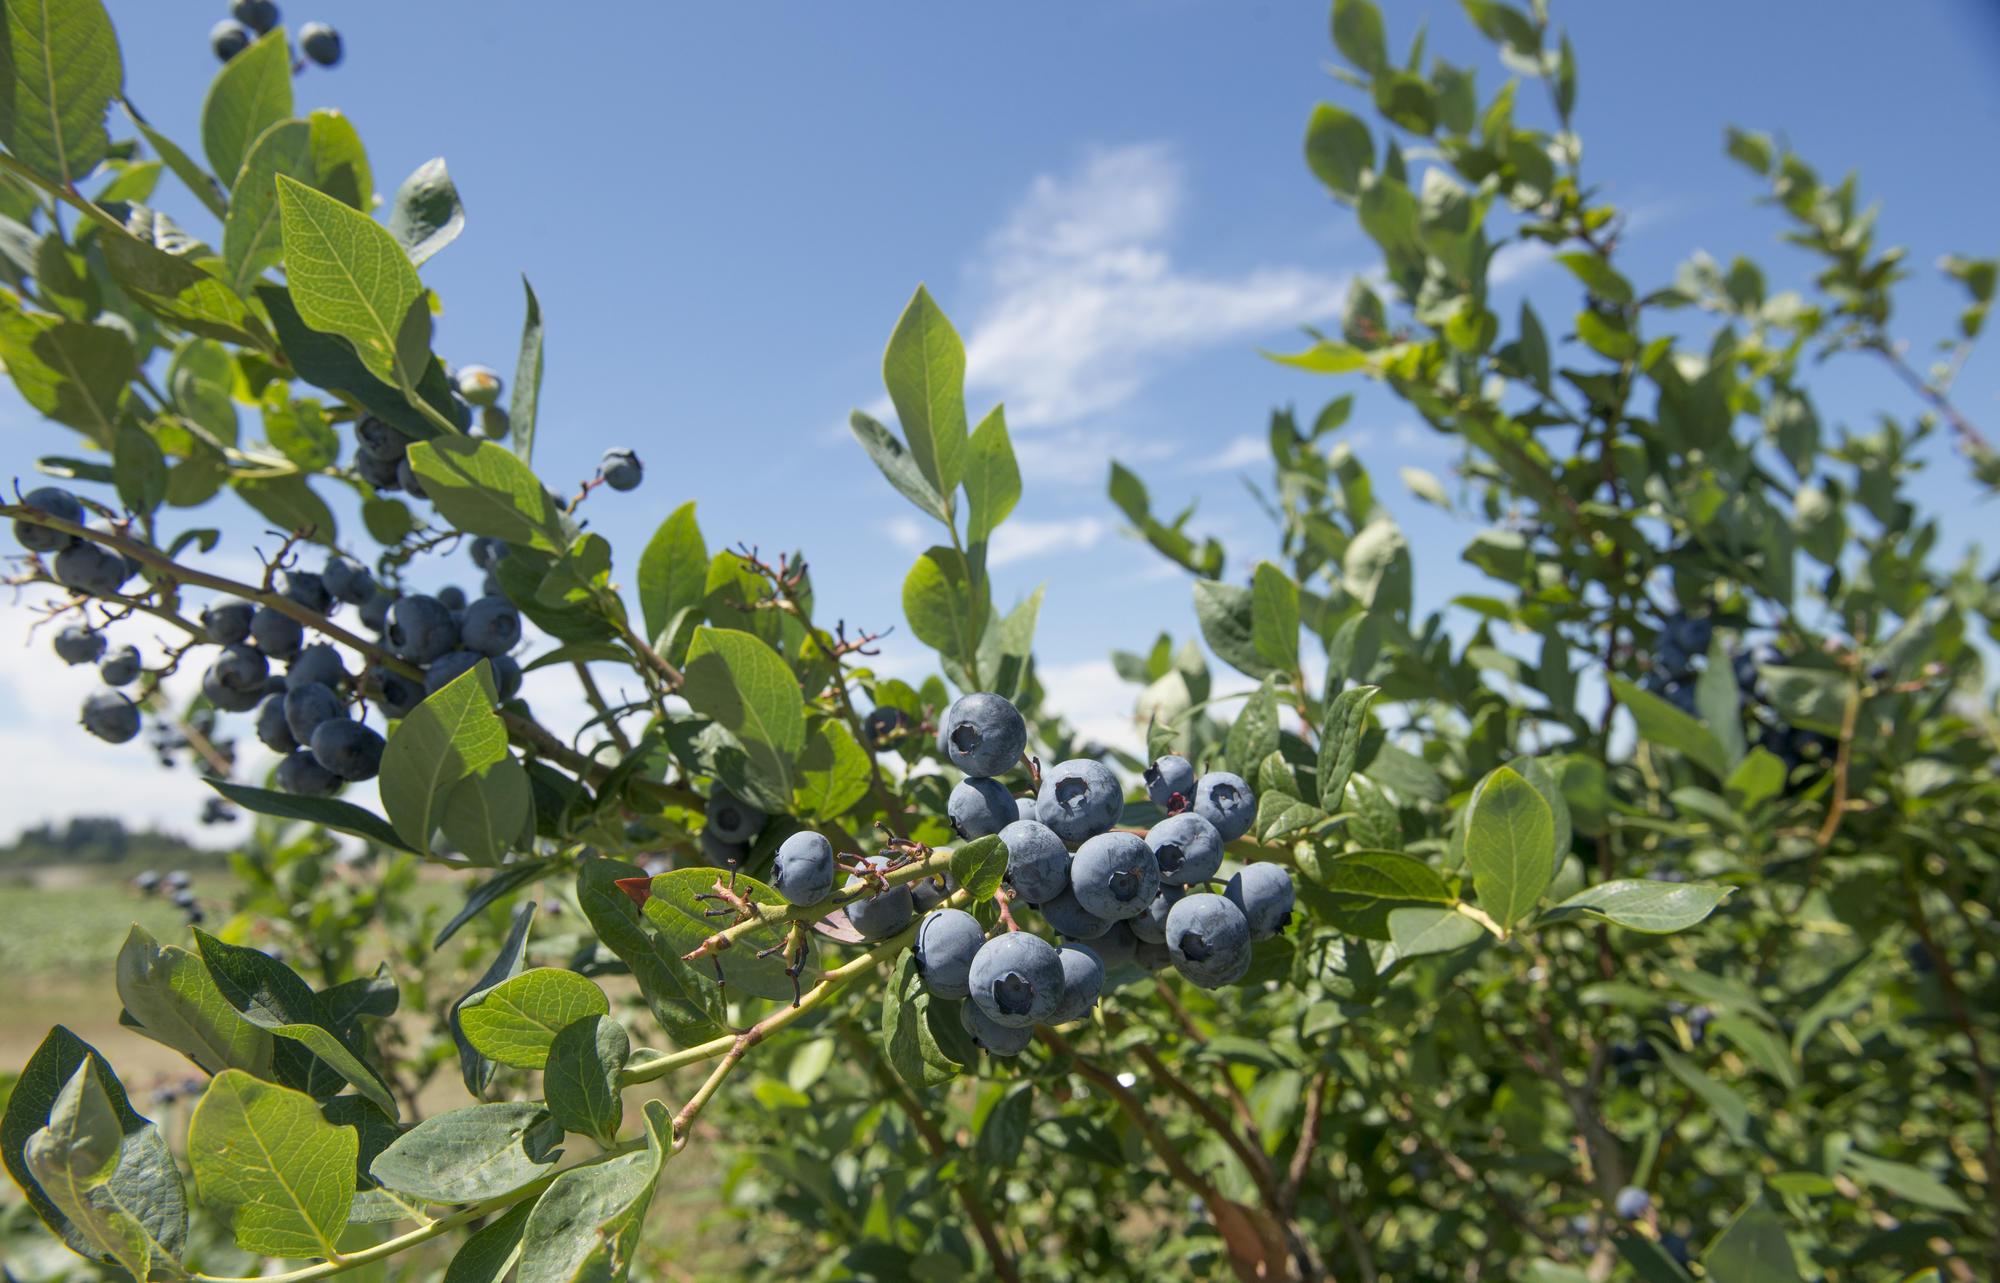 Choosing the Ideal Location for Your Blueberry Plants